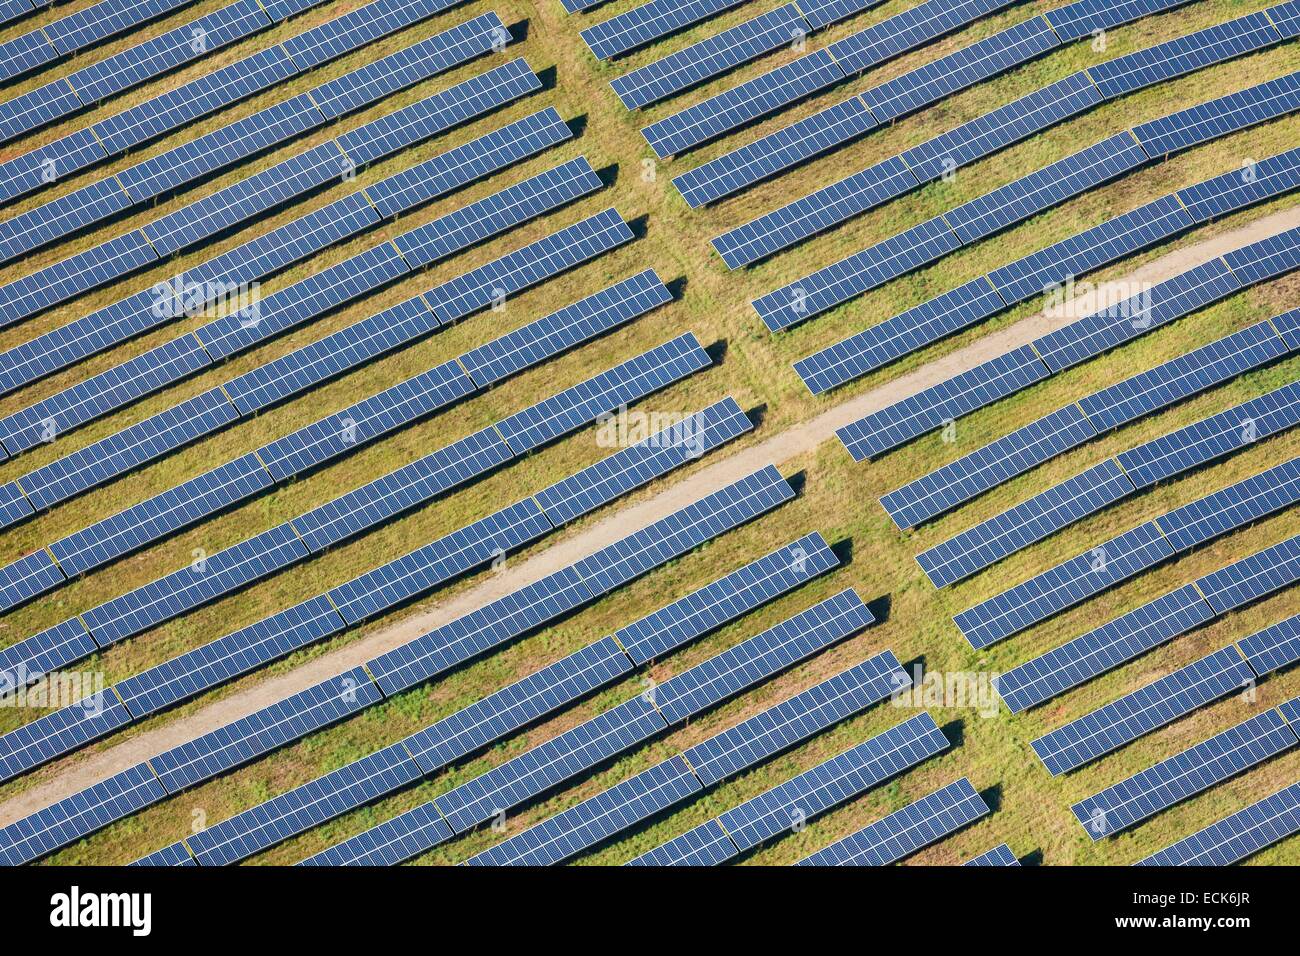 France, Indre, Chaillac, solar power plant (aerial view) Stock Photo